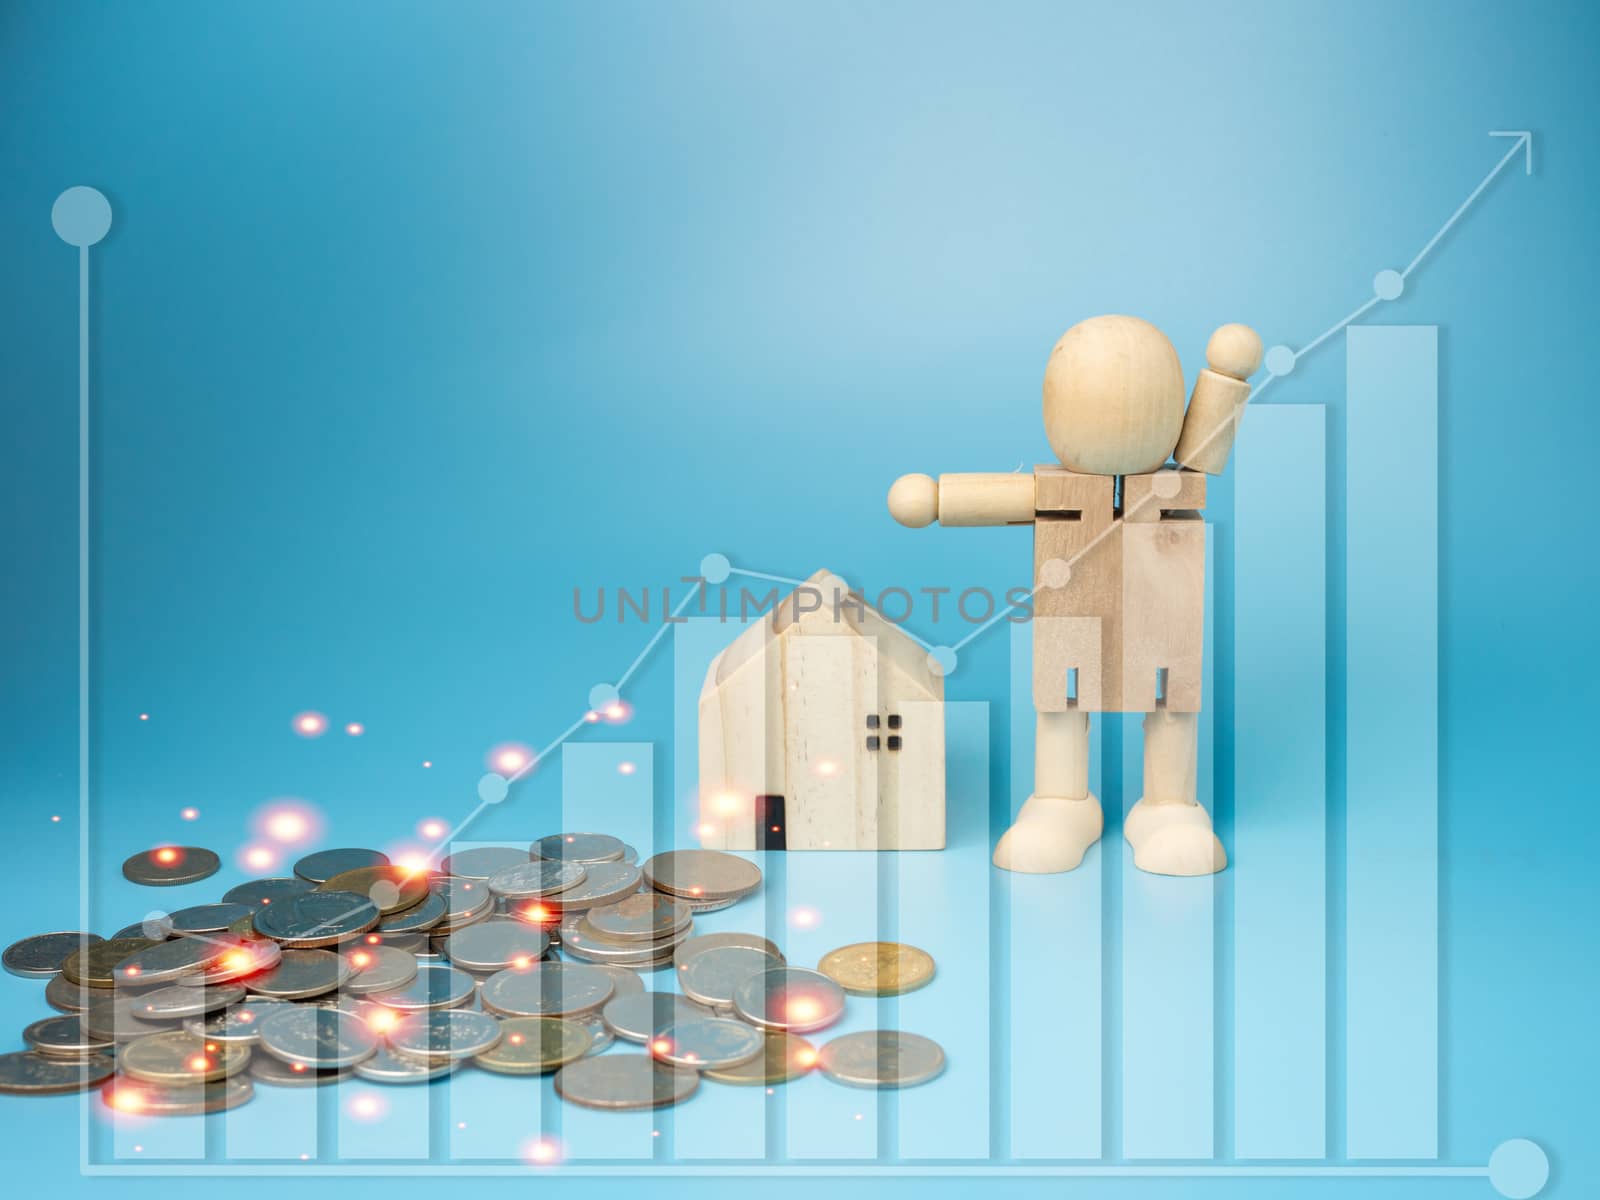 Model wooden houses and wooden dolls Stand by the pile of money With a financial graph in the foreground on a blue background.